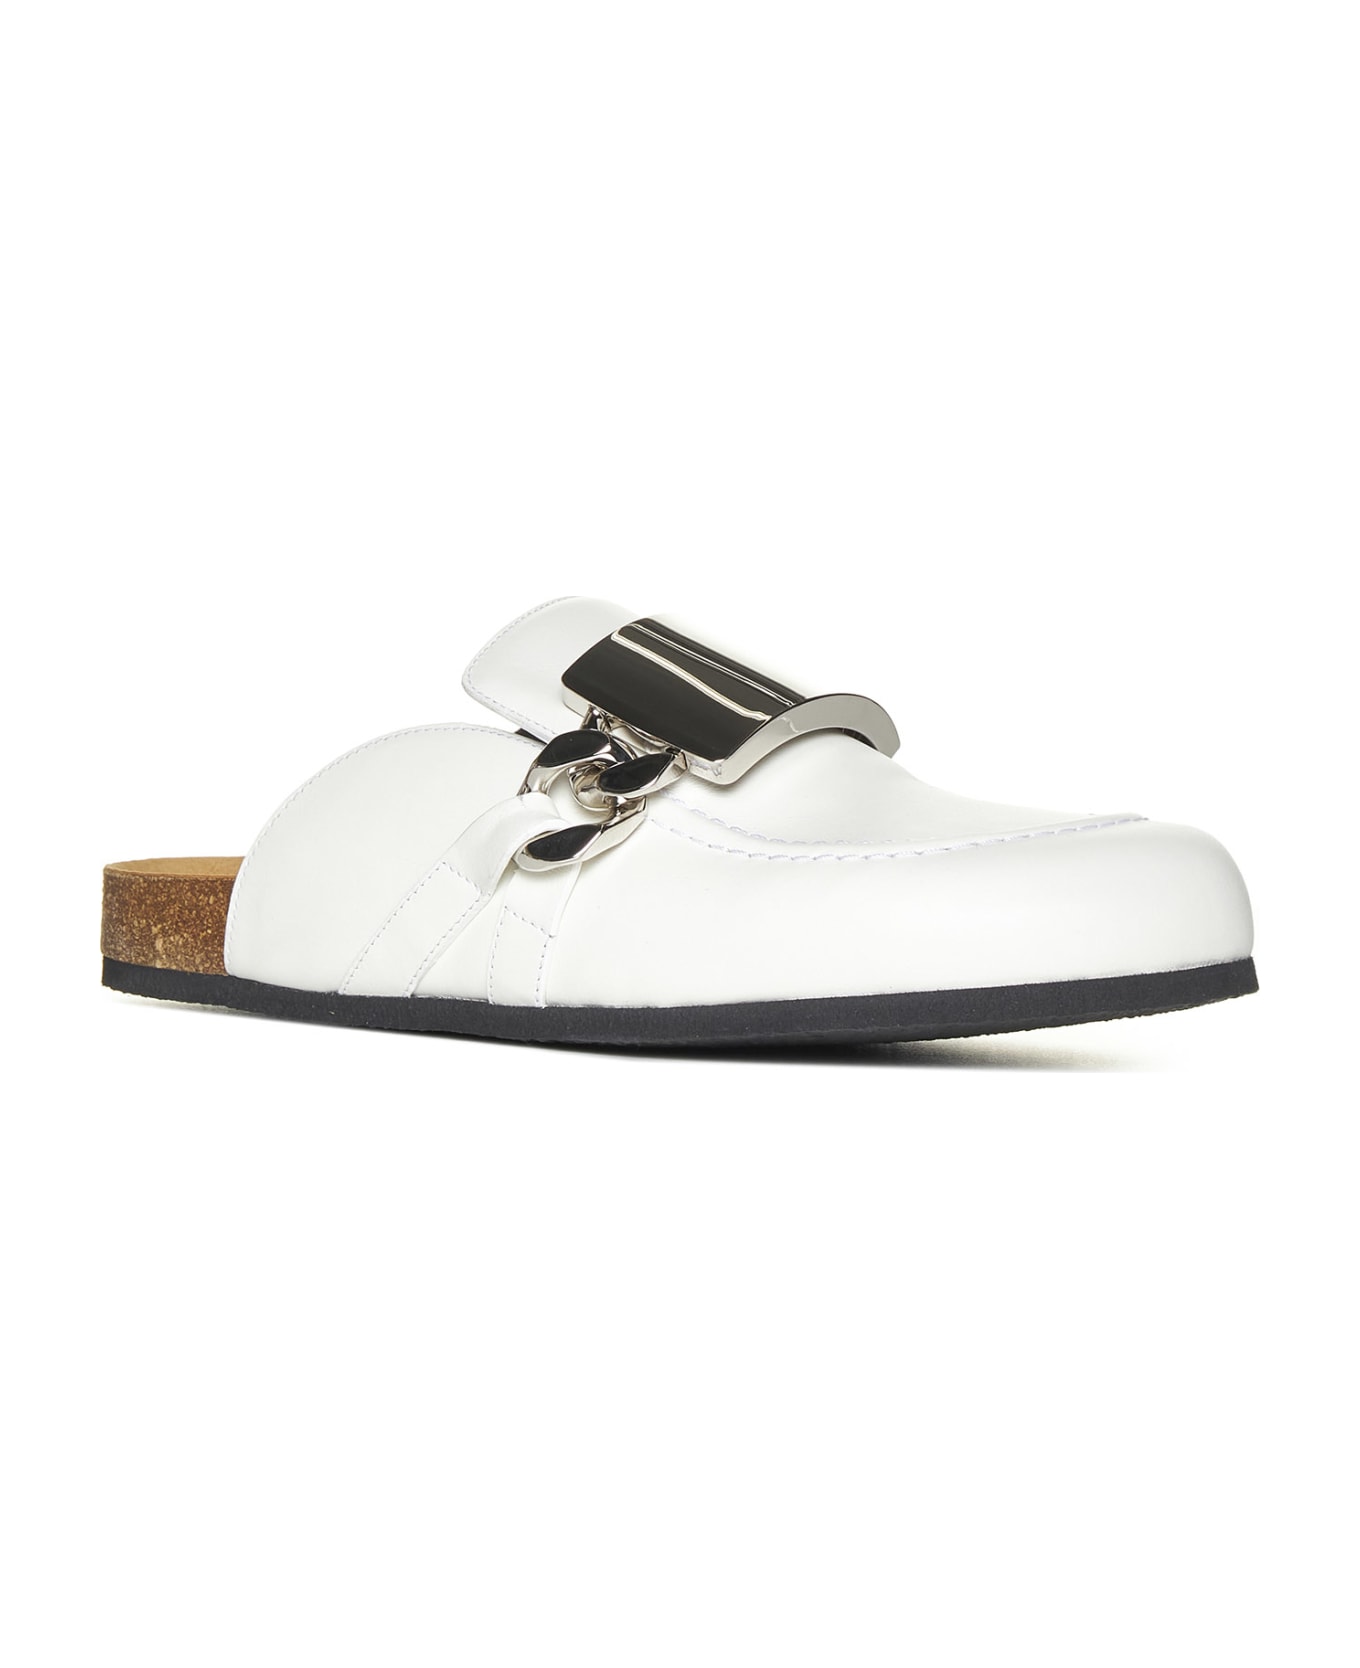 J.W. Anderson Shoes - White